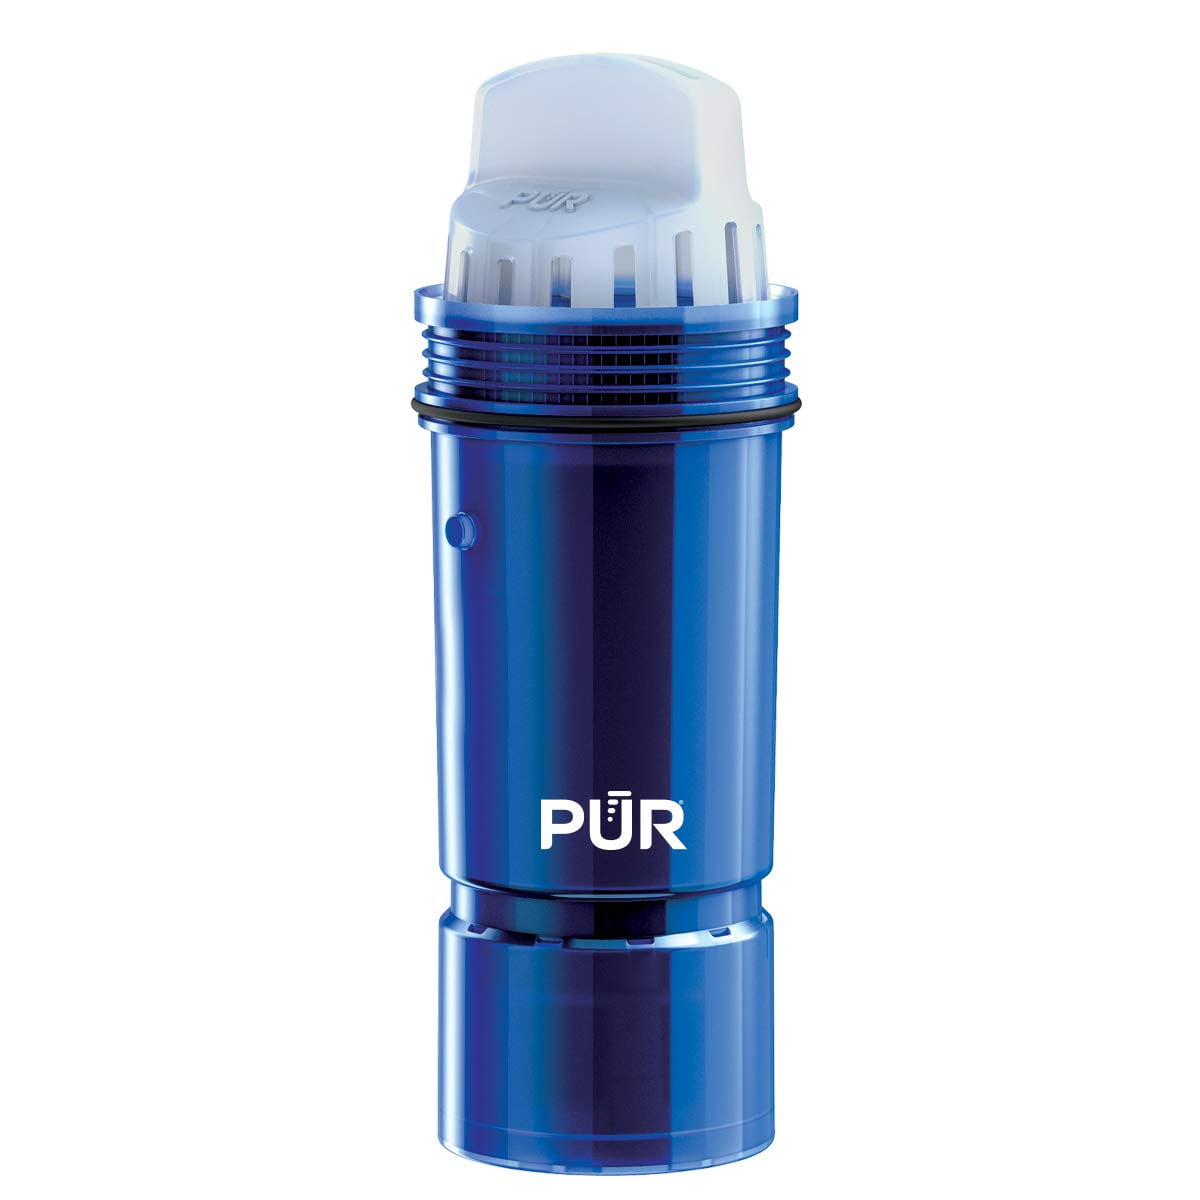 Rur Genuine Rf 9999 Water Filter 6 Pack Compatible With Pur Rf